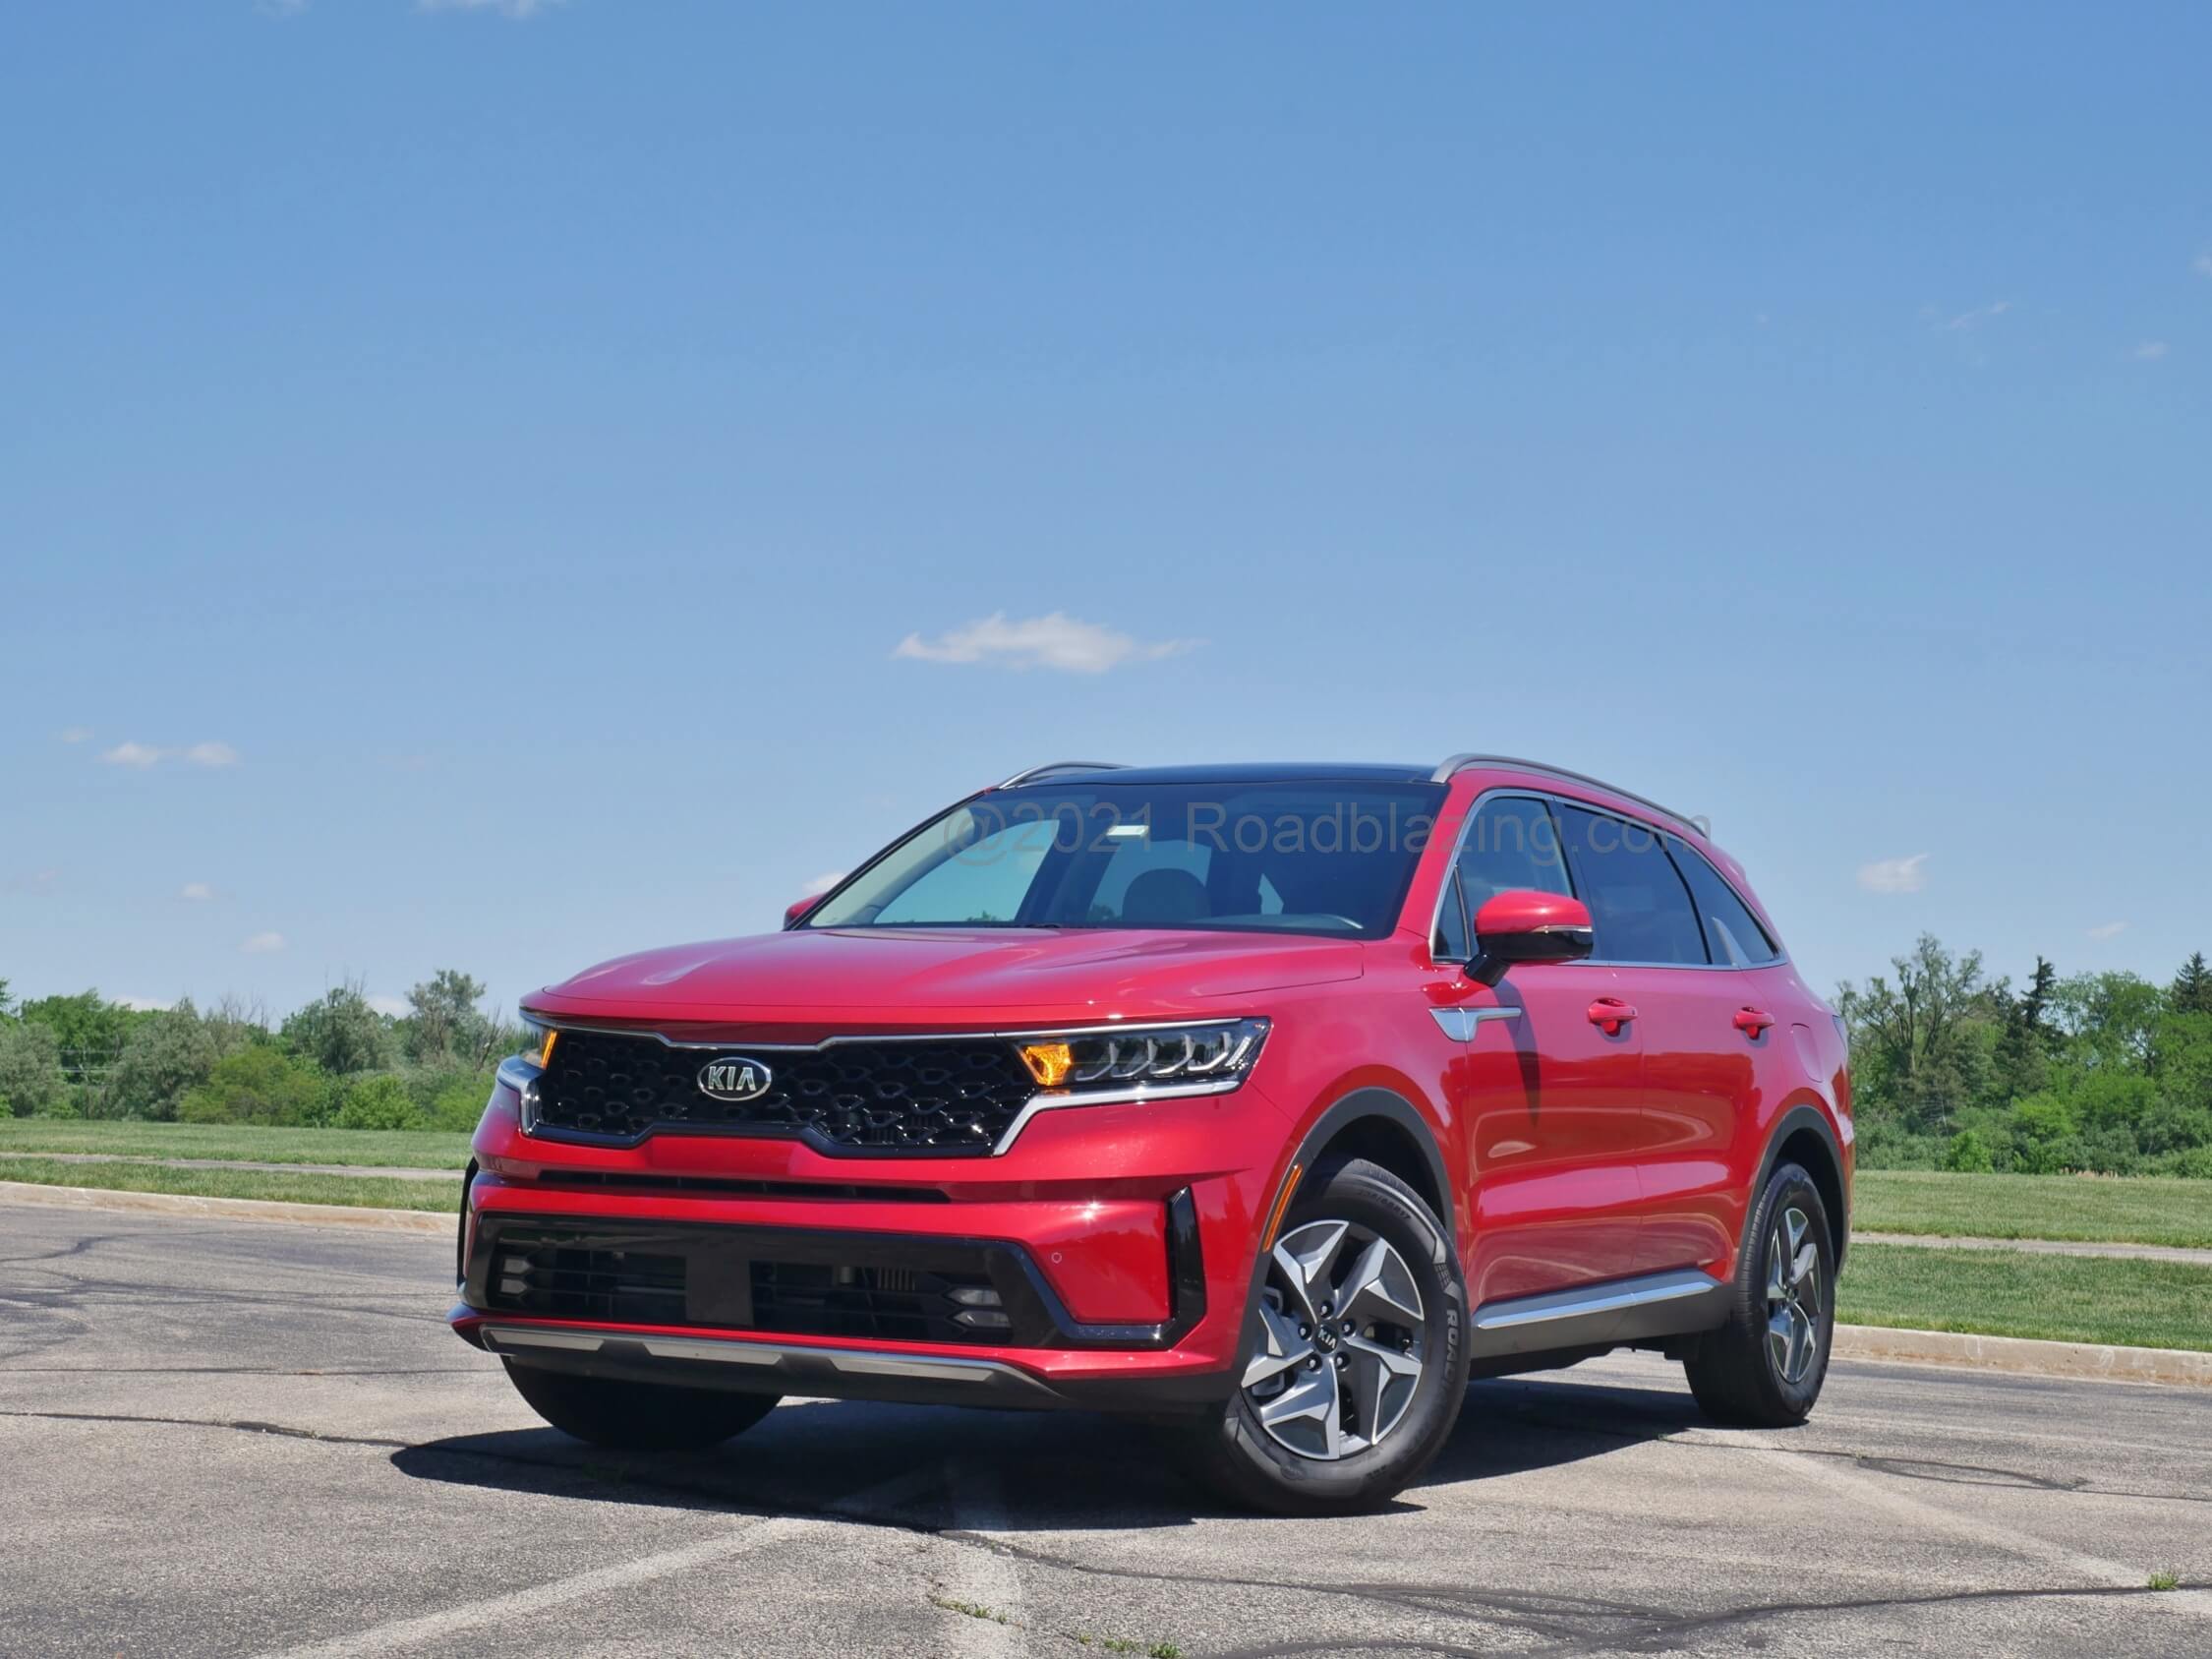 2021 Kia Sorento HEV EX 1.6T Hybrid: Hood forms powerful clamshell over wide dark lattice farfalle grille. Front and rear lower valence metallic accents merge with simulated skid plates